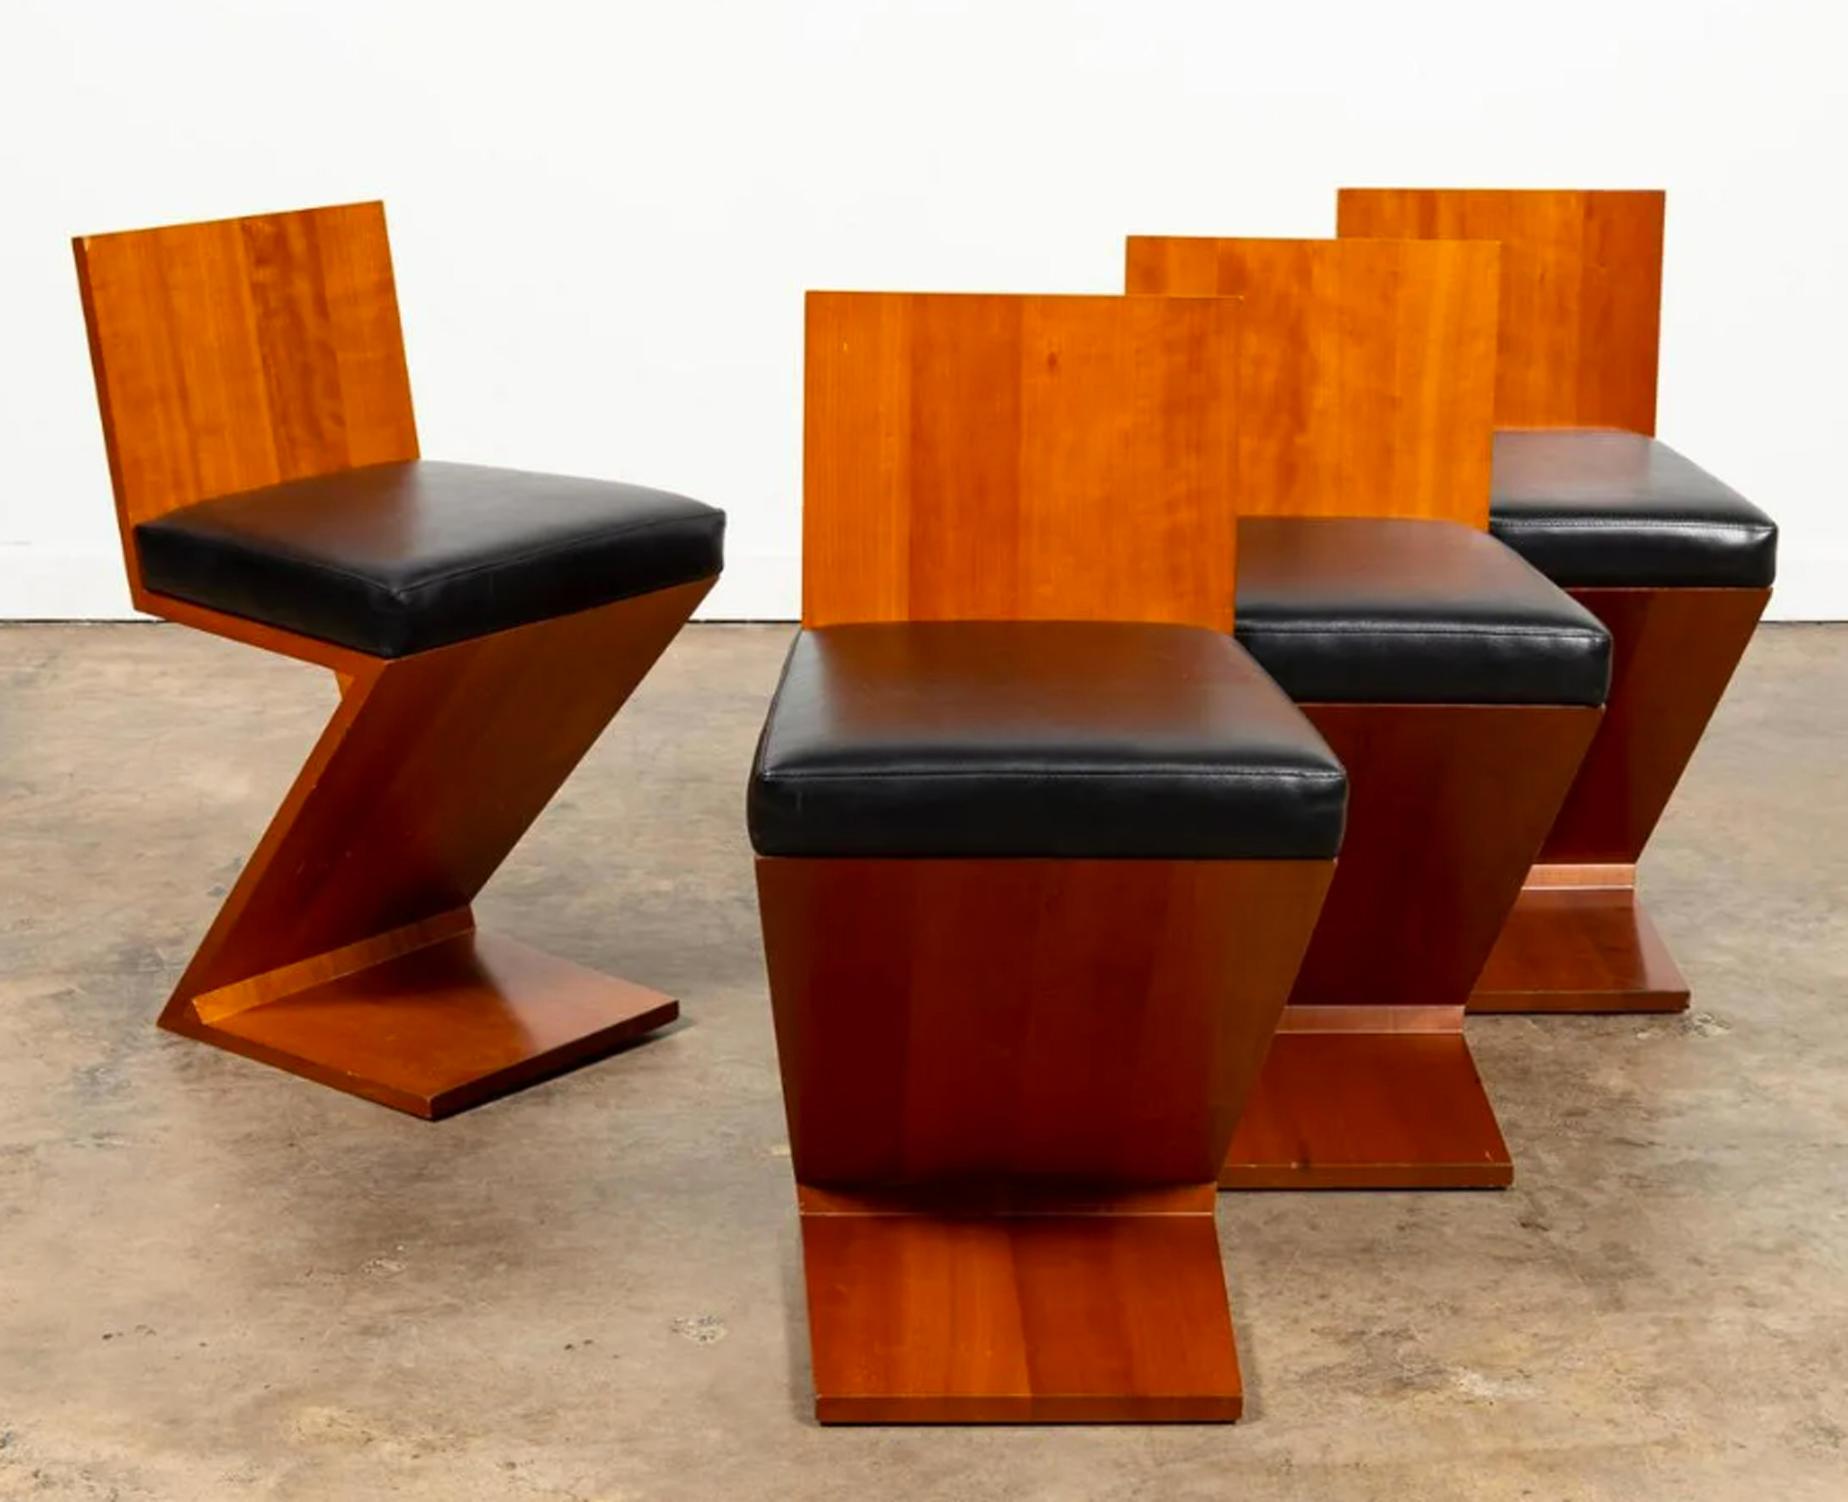 Gerrit Rietveld for Cassina, circa 1980s. Produced in Italy
Set of four 